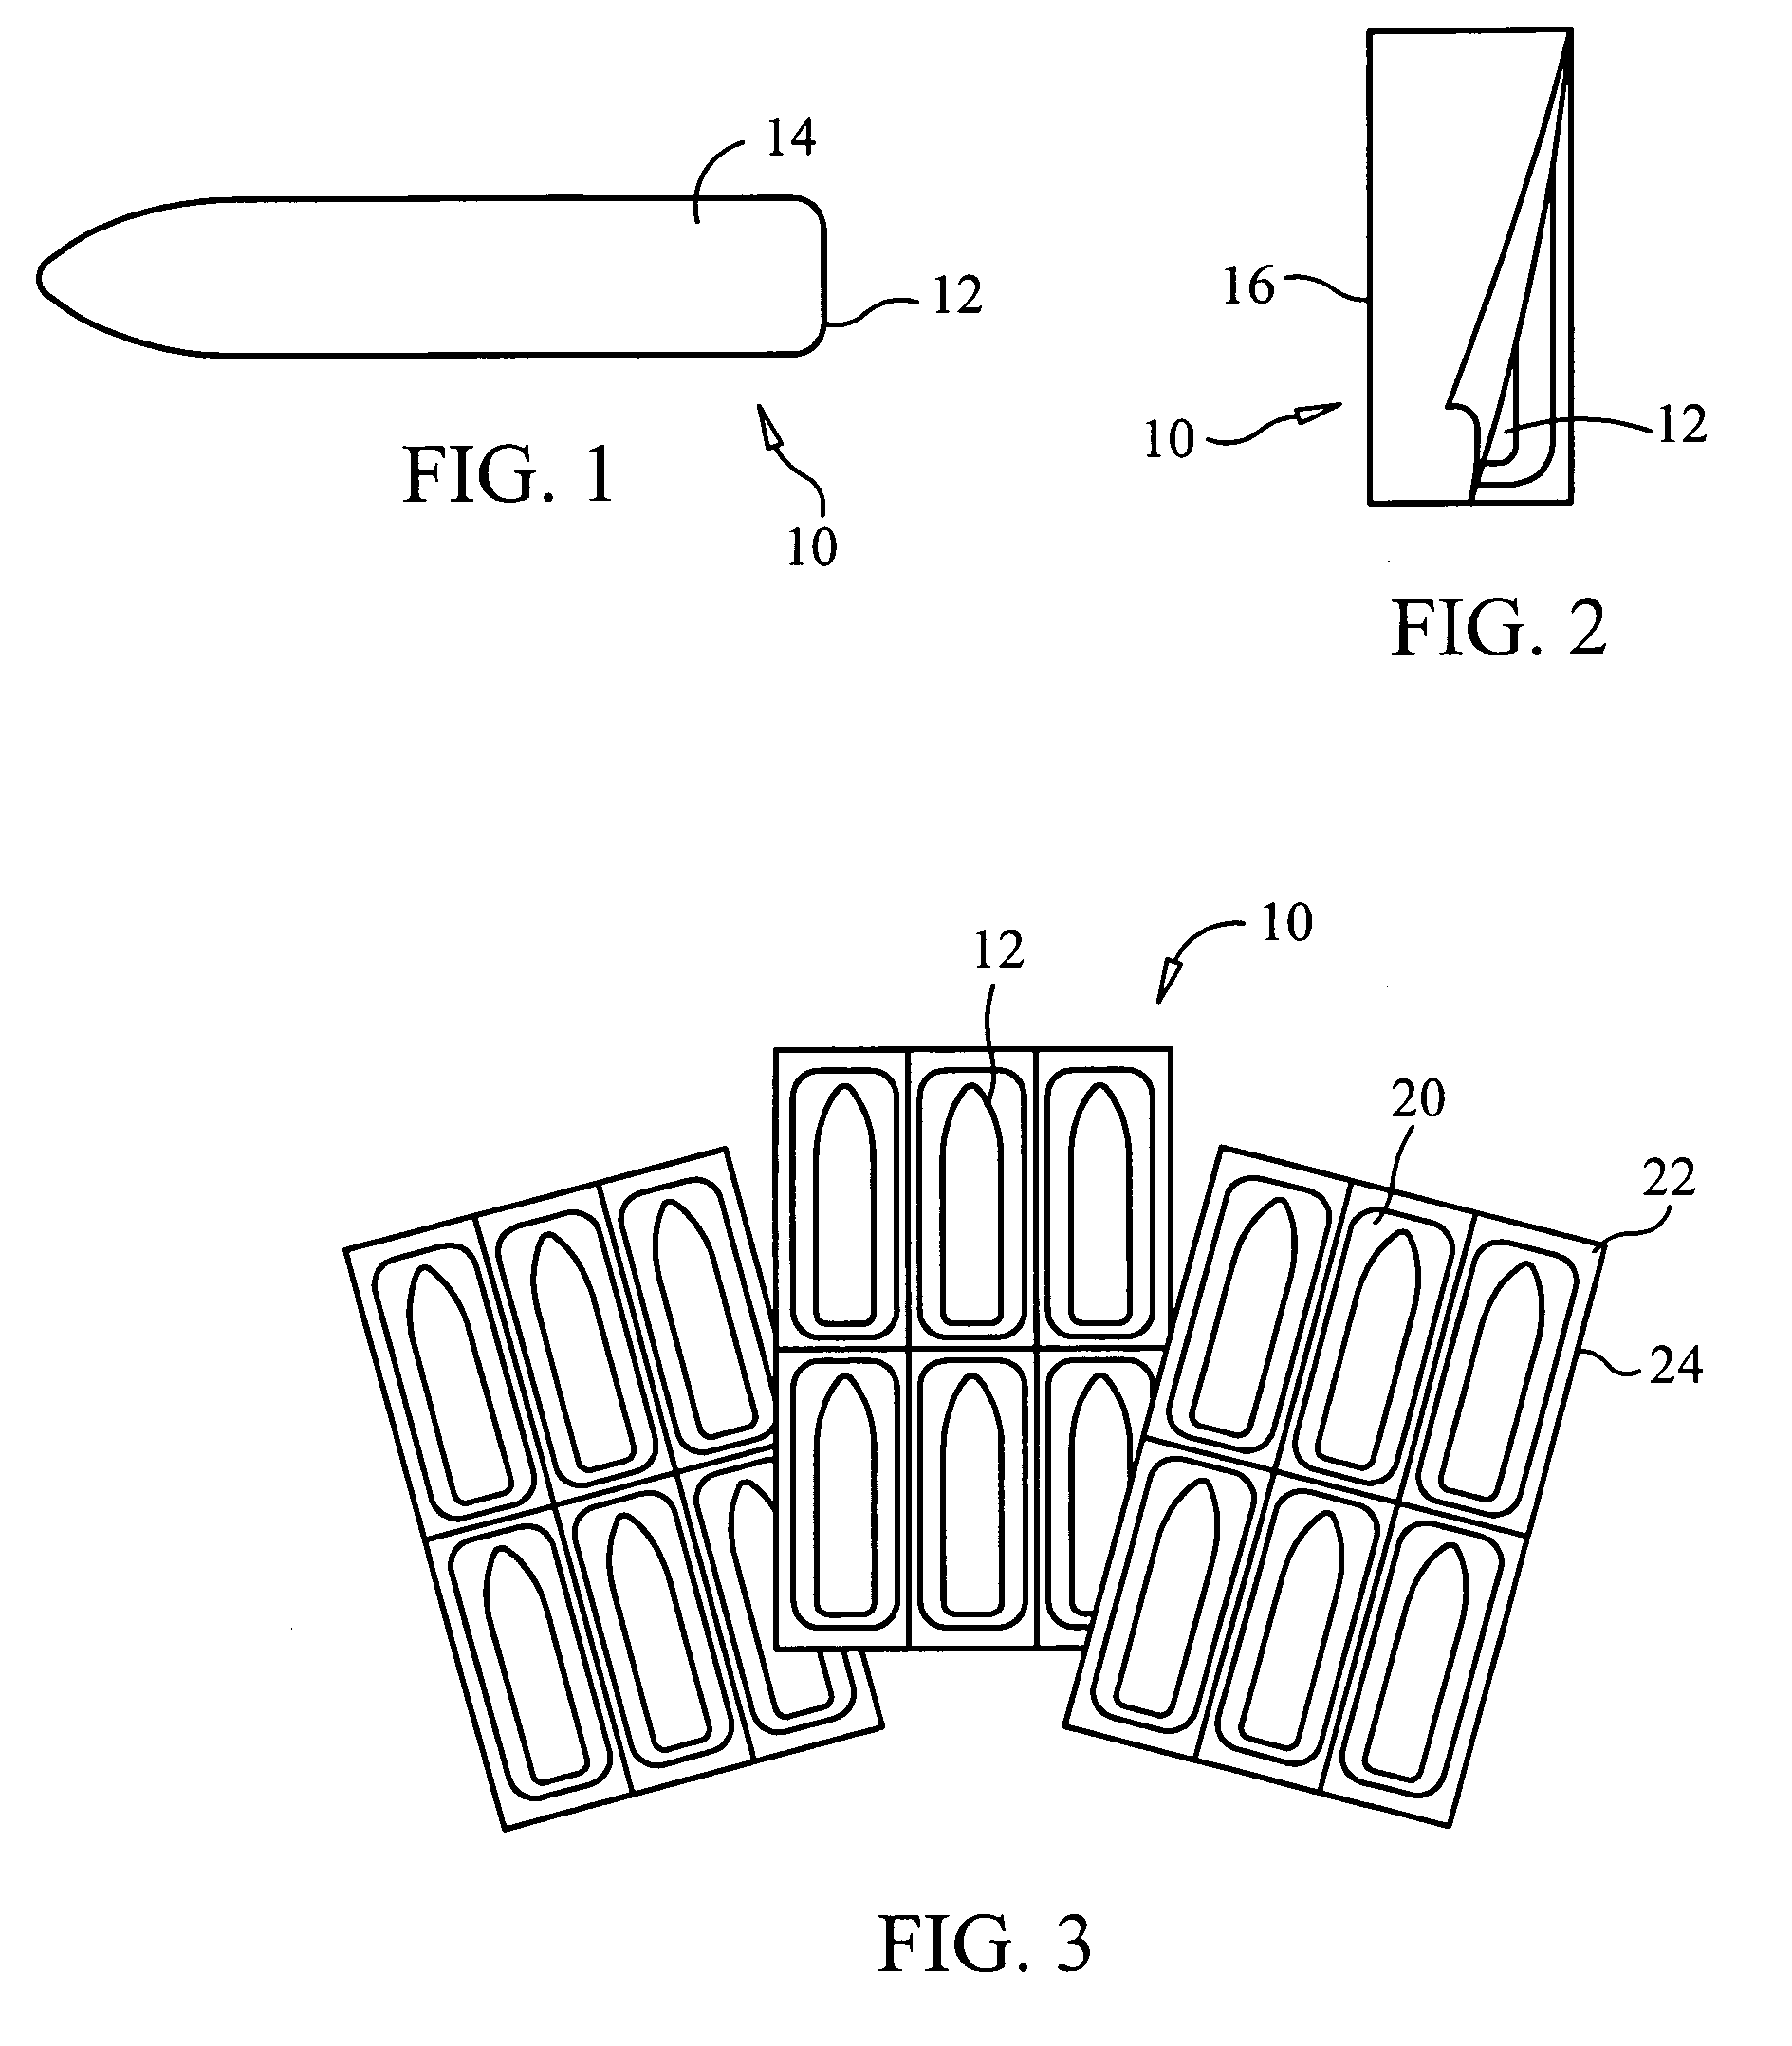 Medication administering device and system